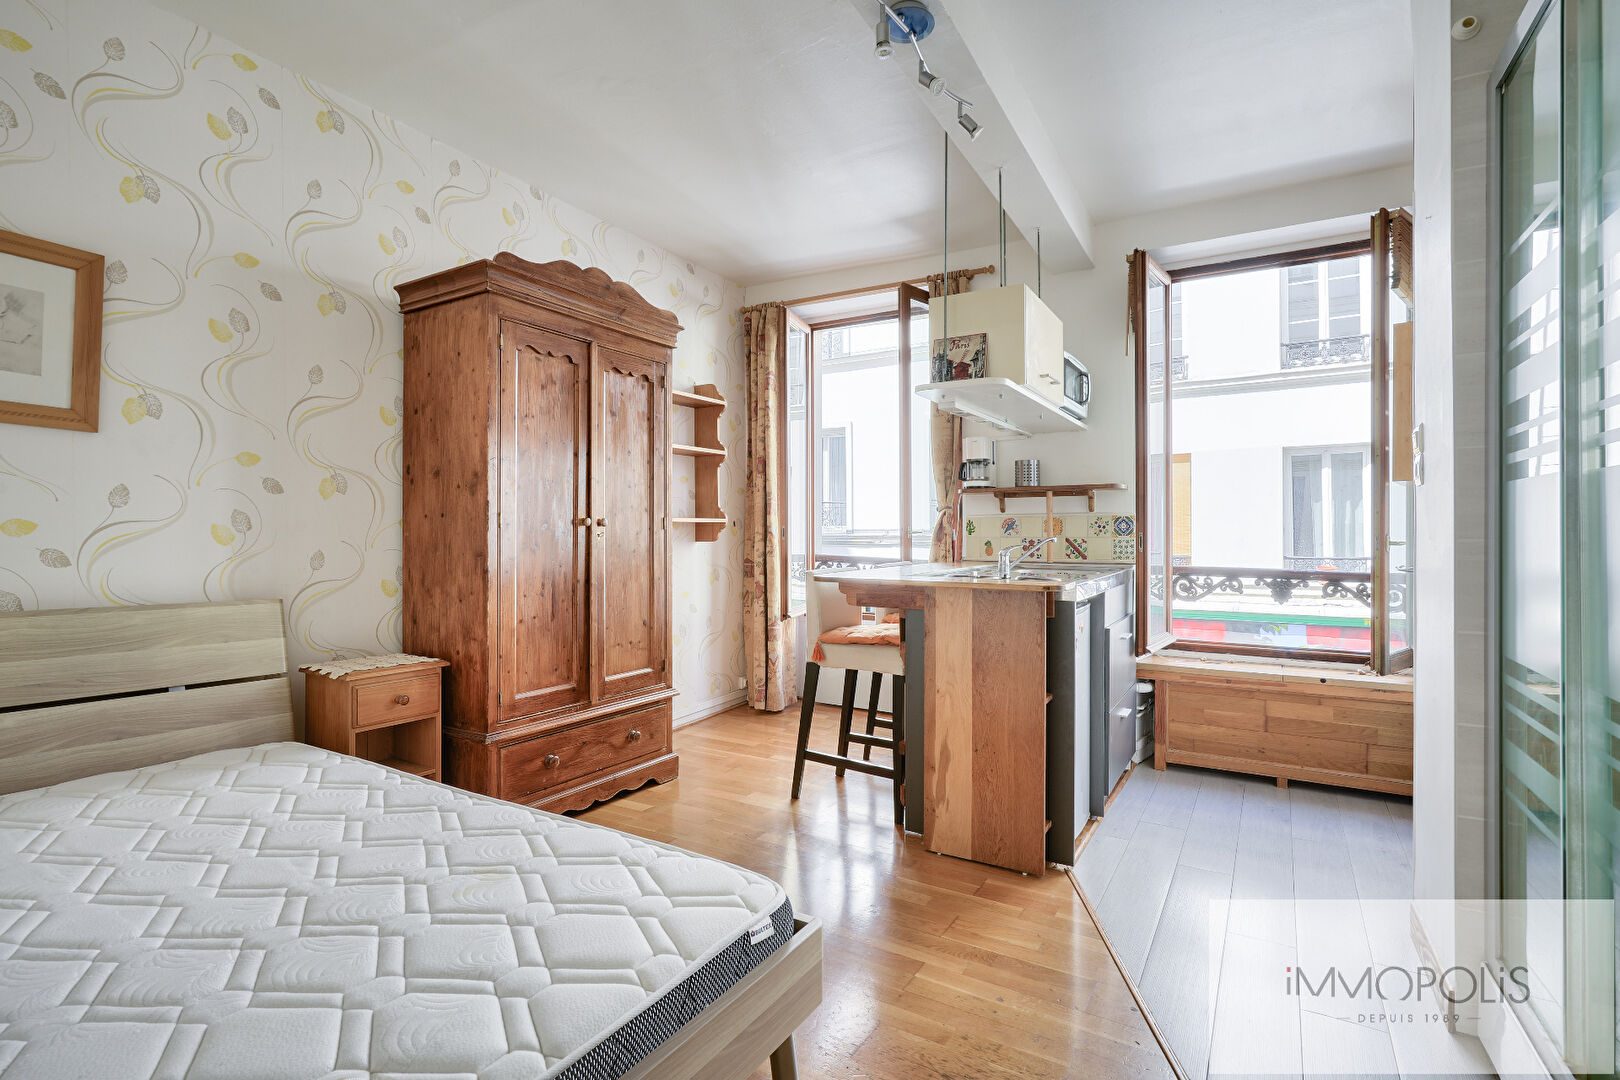 Beautiful studio in good condition well placed in Montmartre with a good DPE: e 2